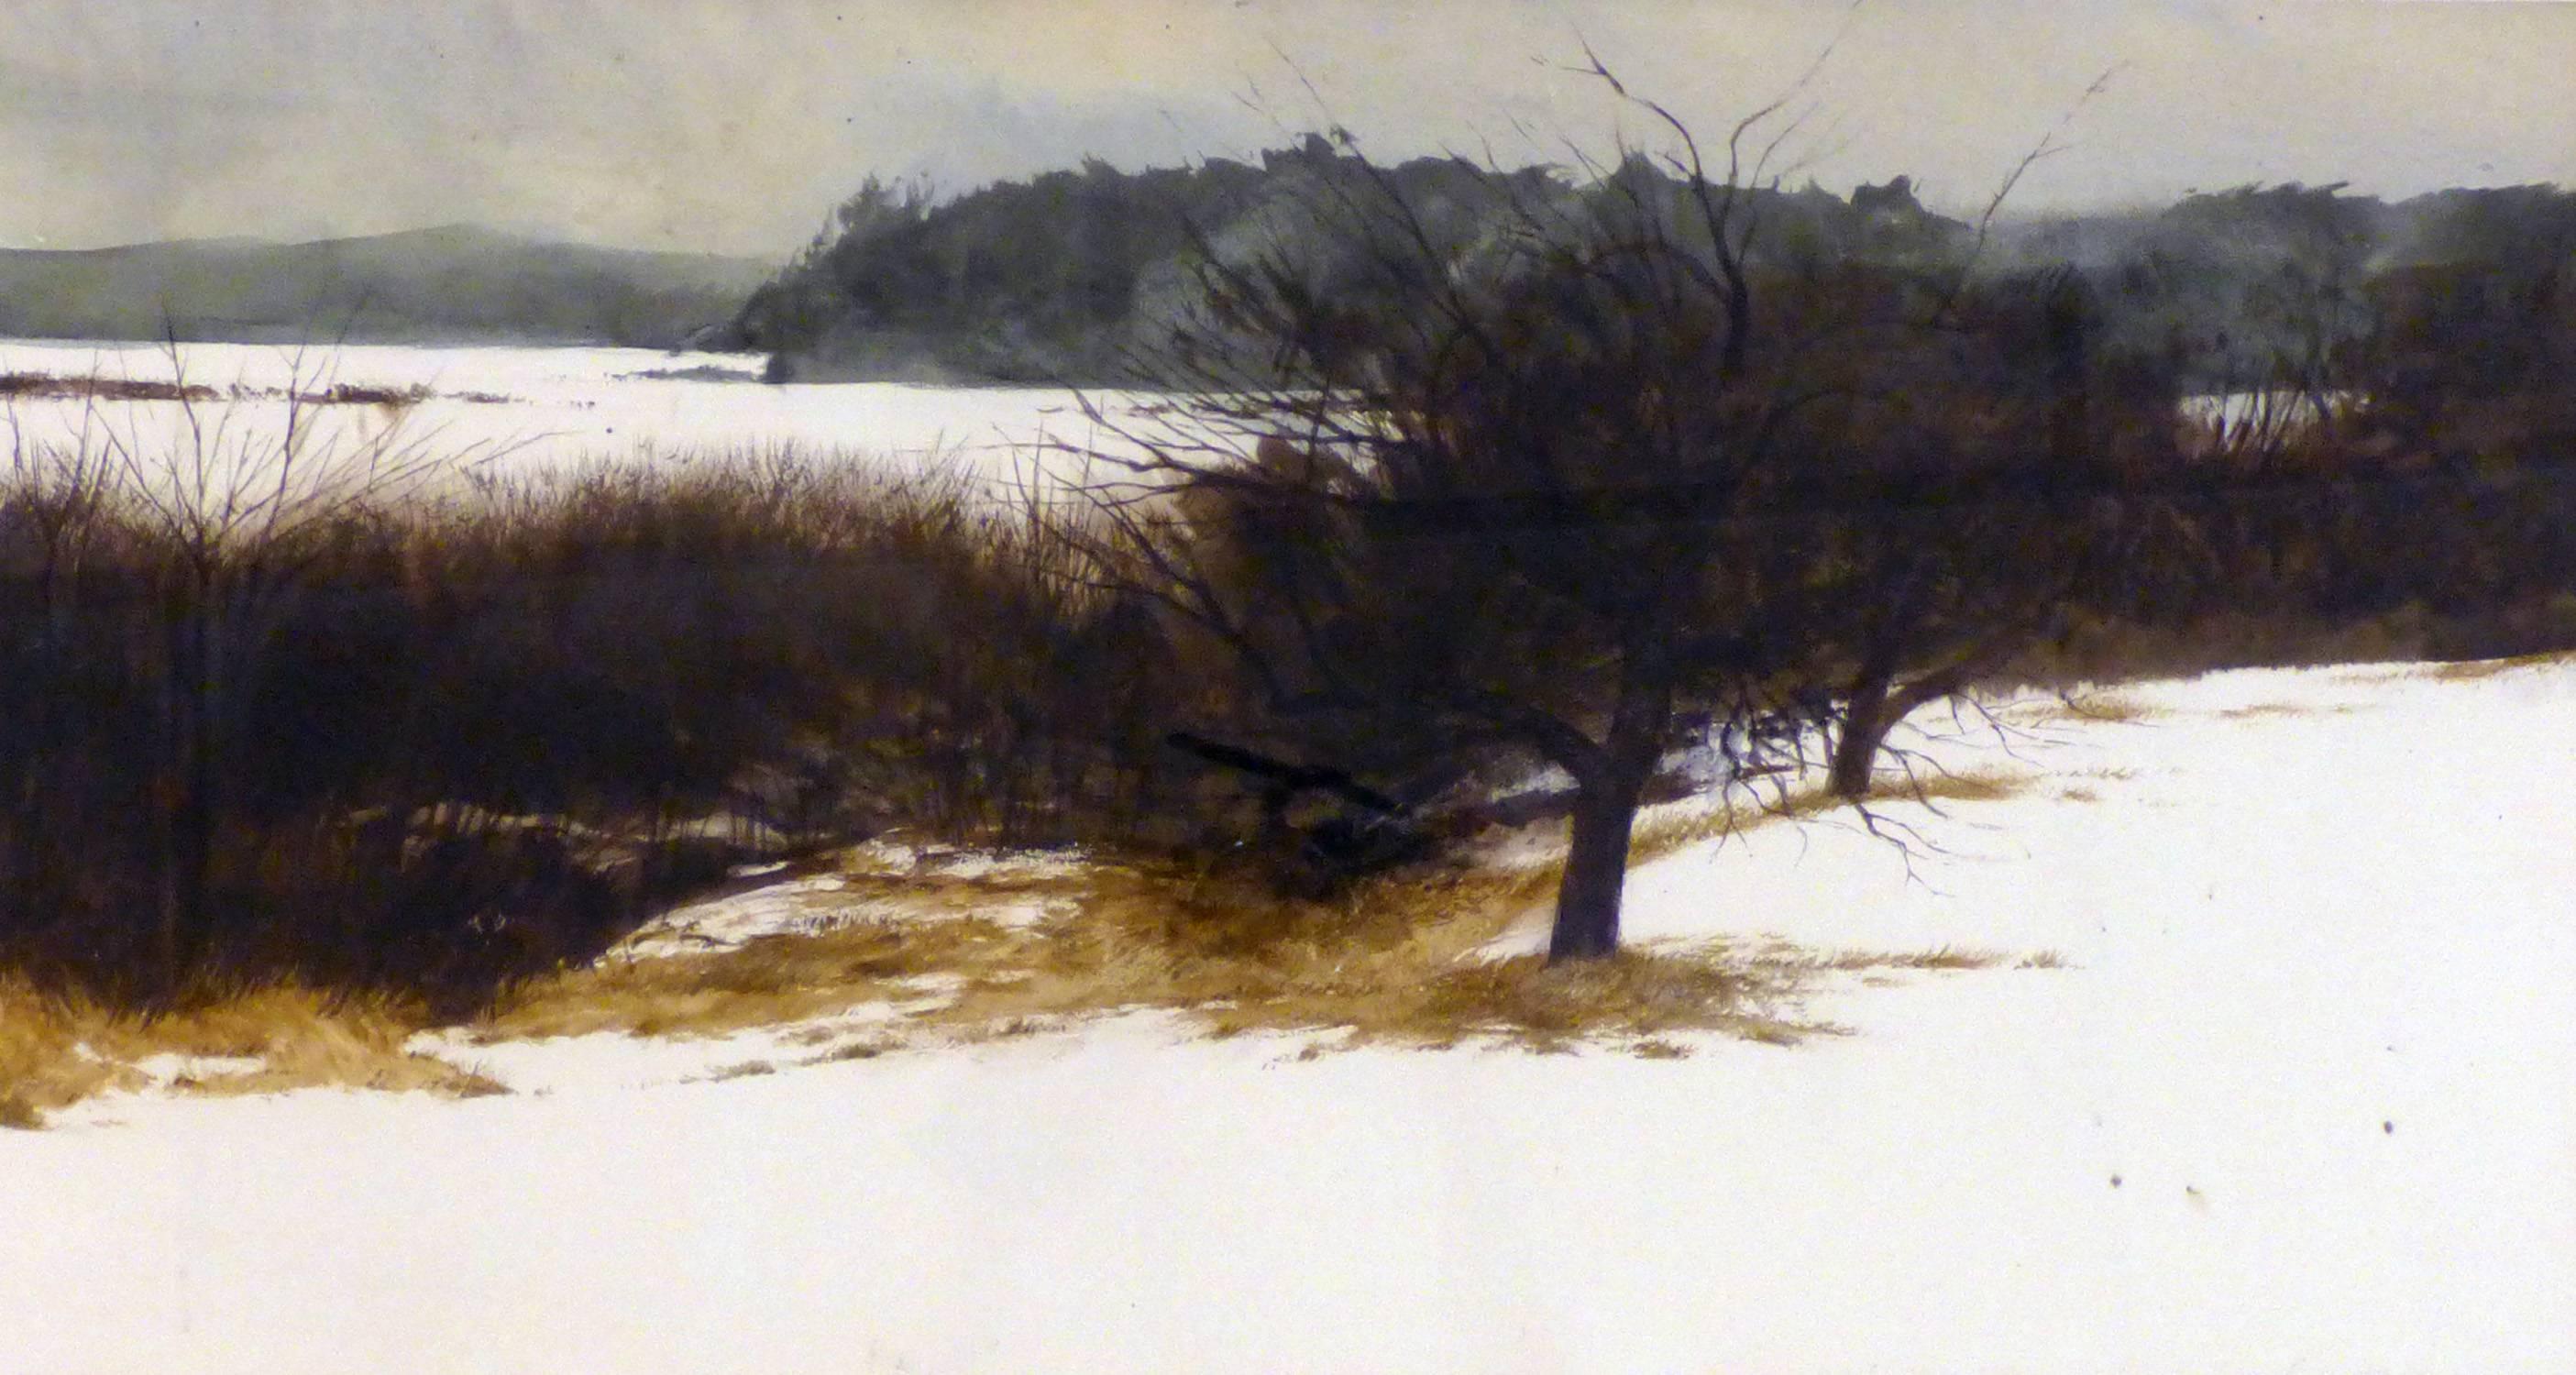 Early Winter Snow - Painting by Thomas Crotty